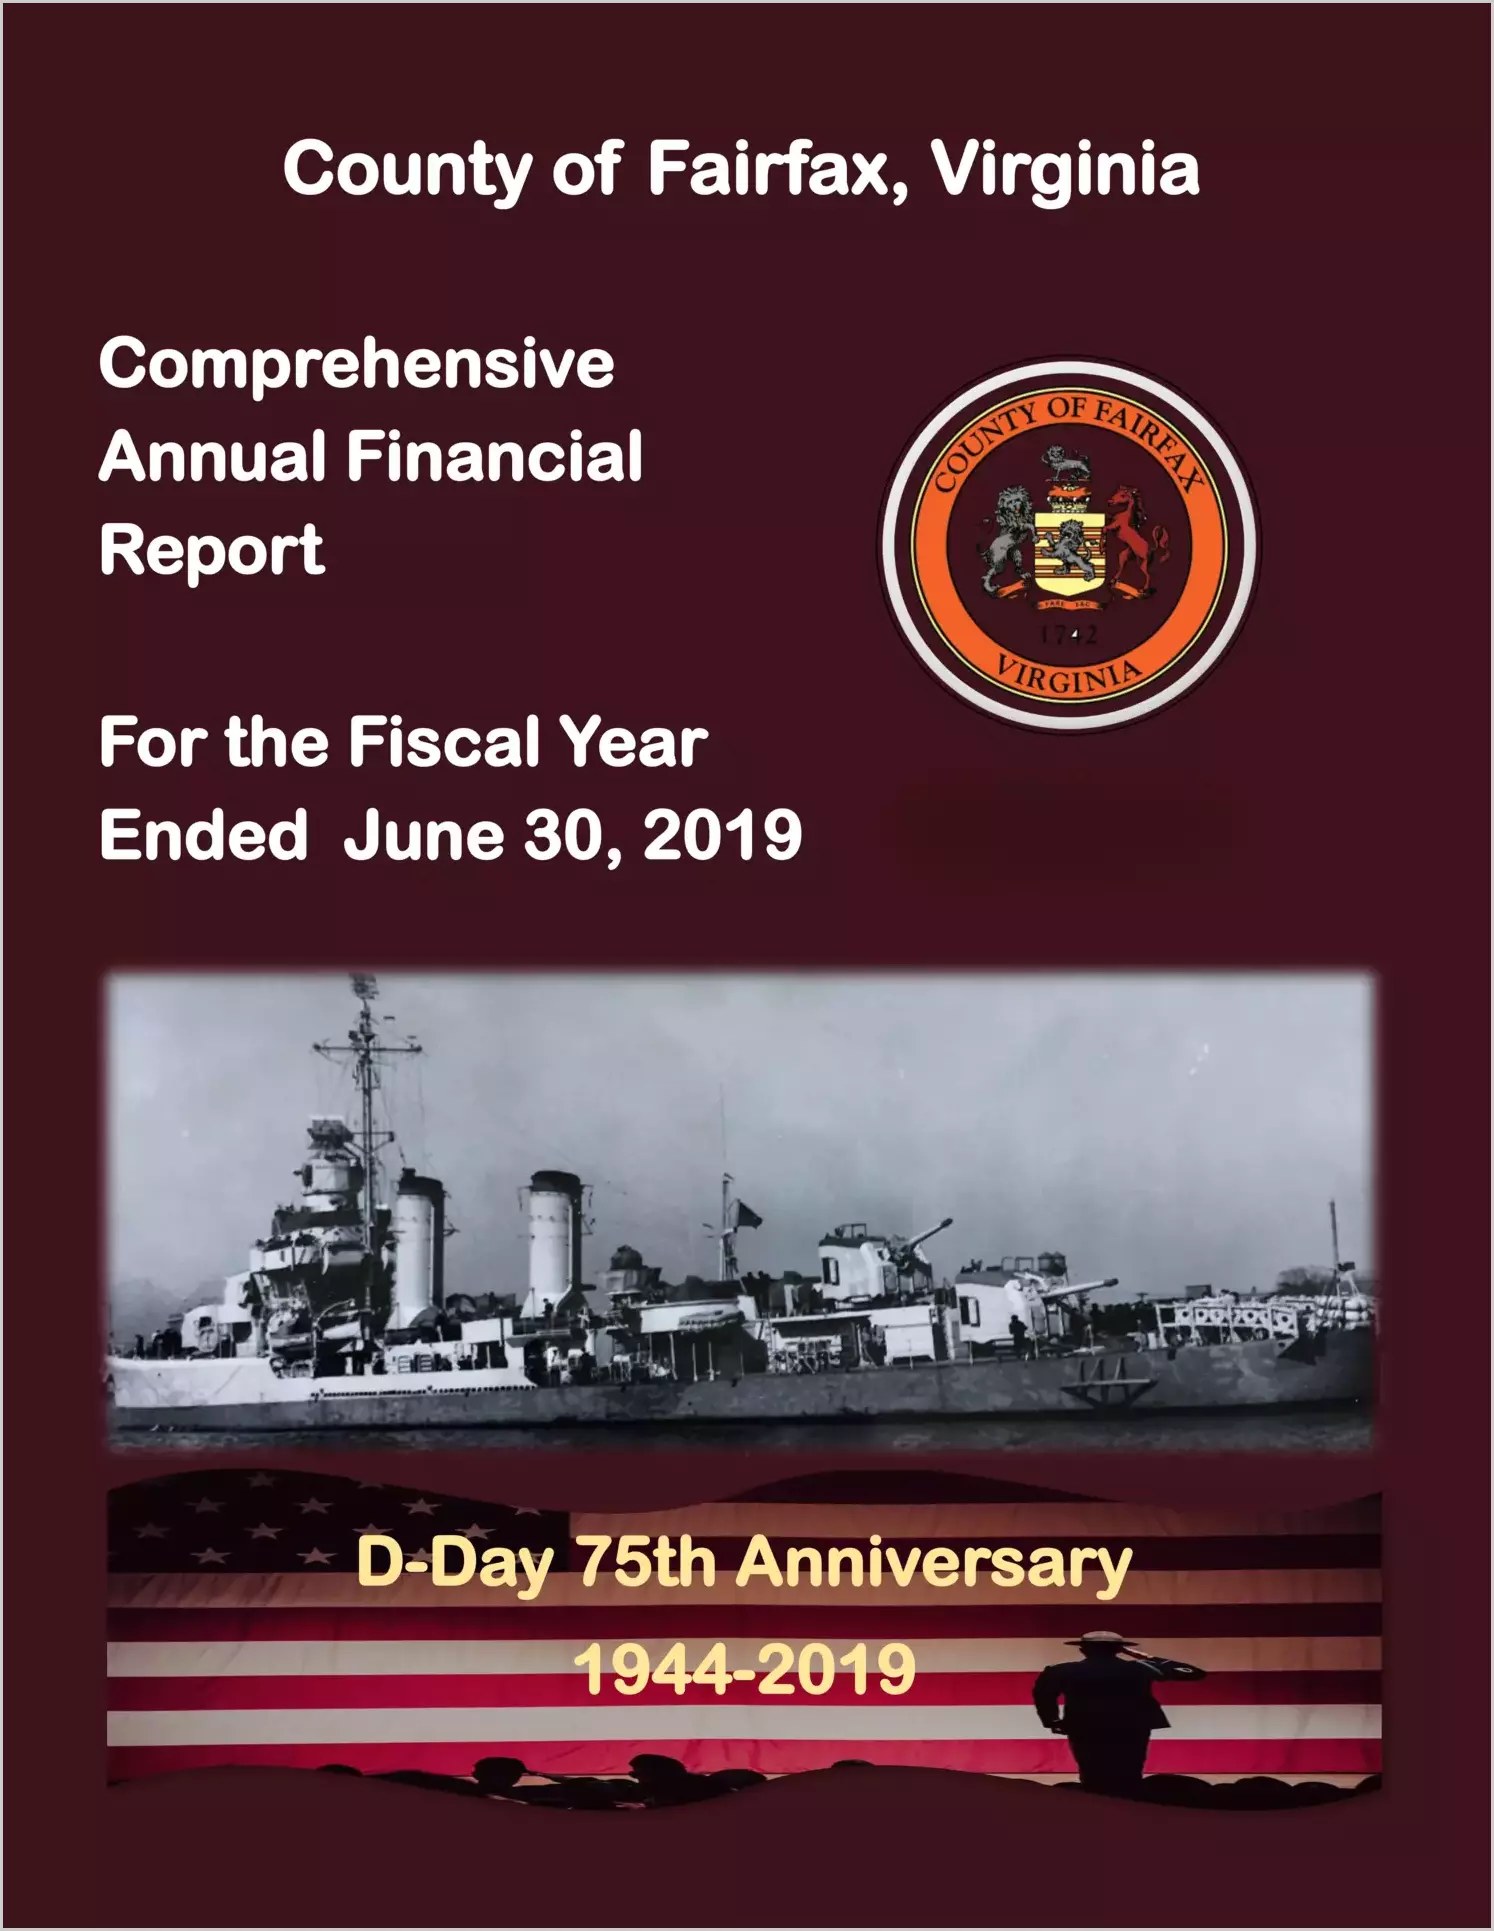 2019 Annual Financial Report for County of Fairfax